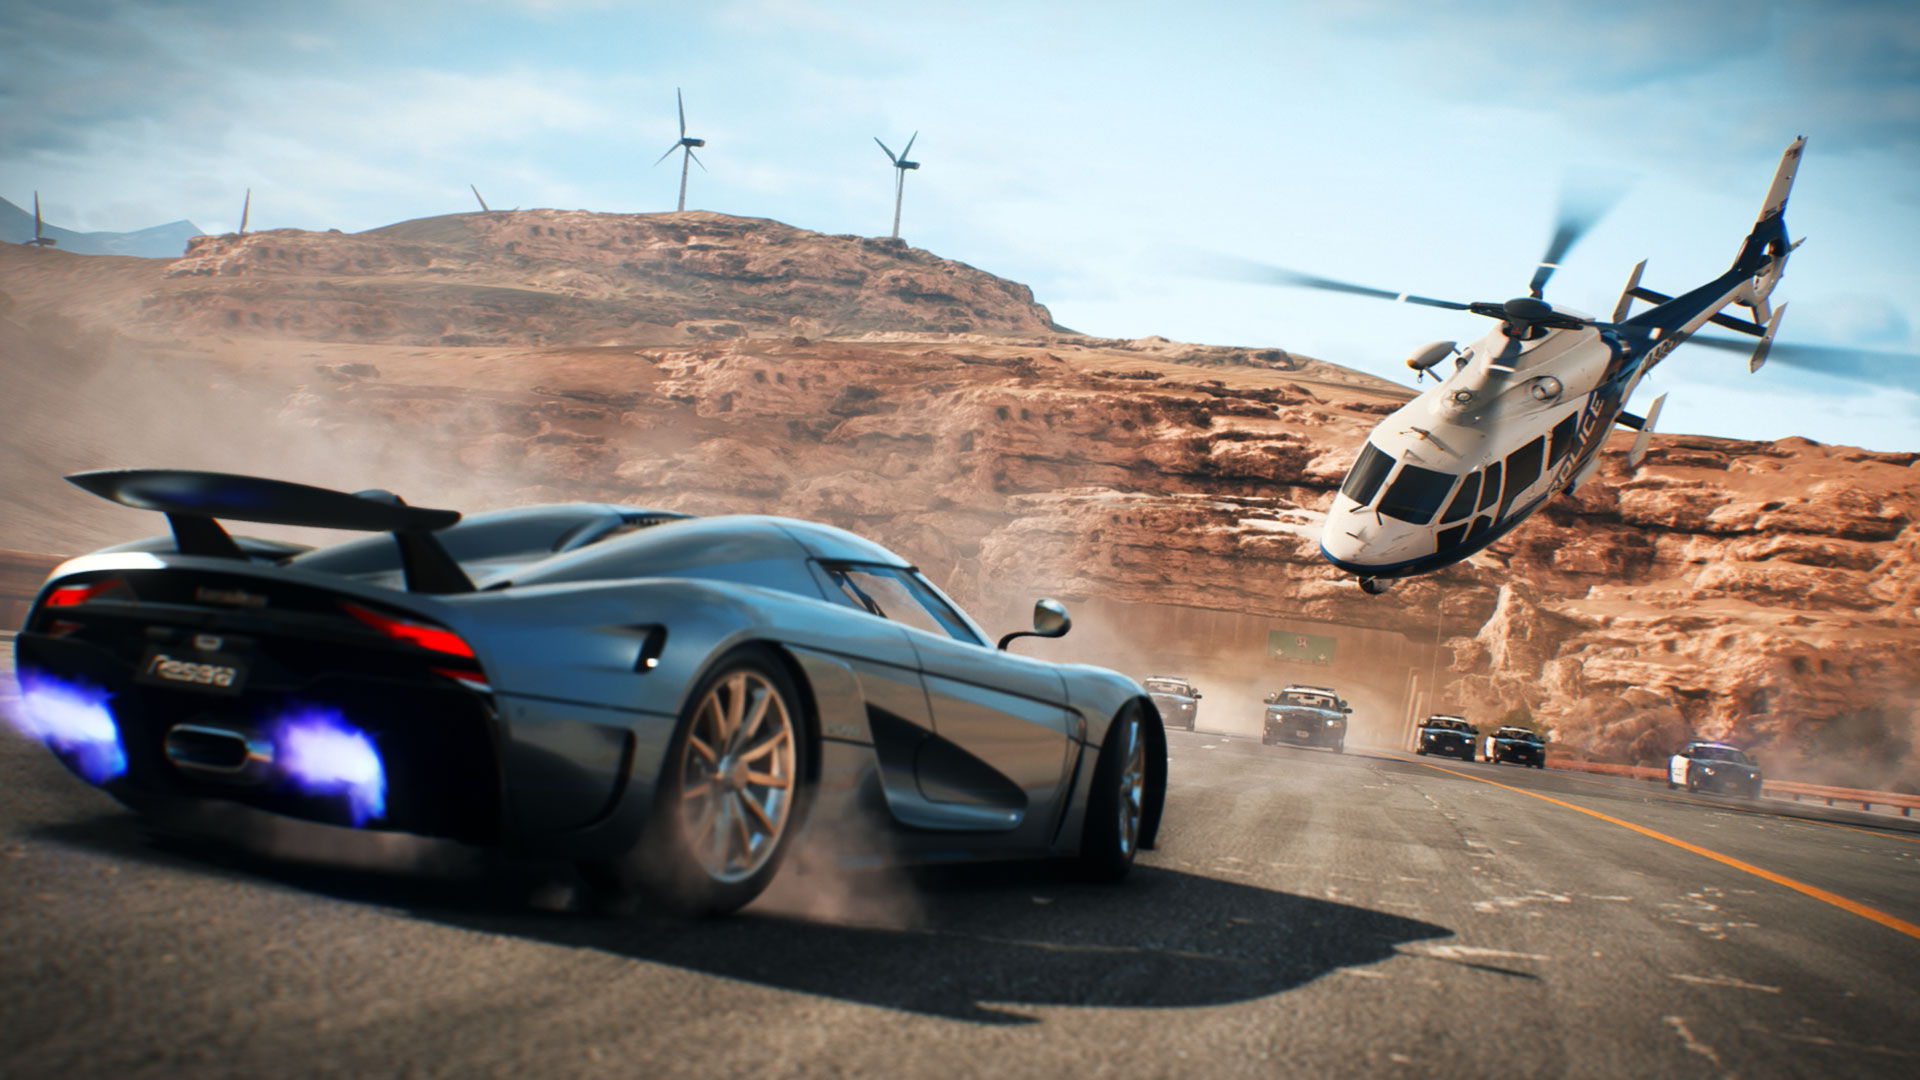 Image result for need for speed payback